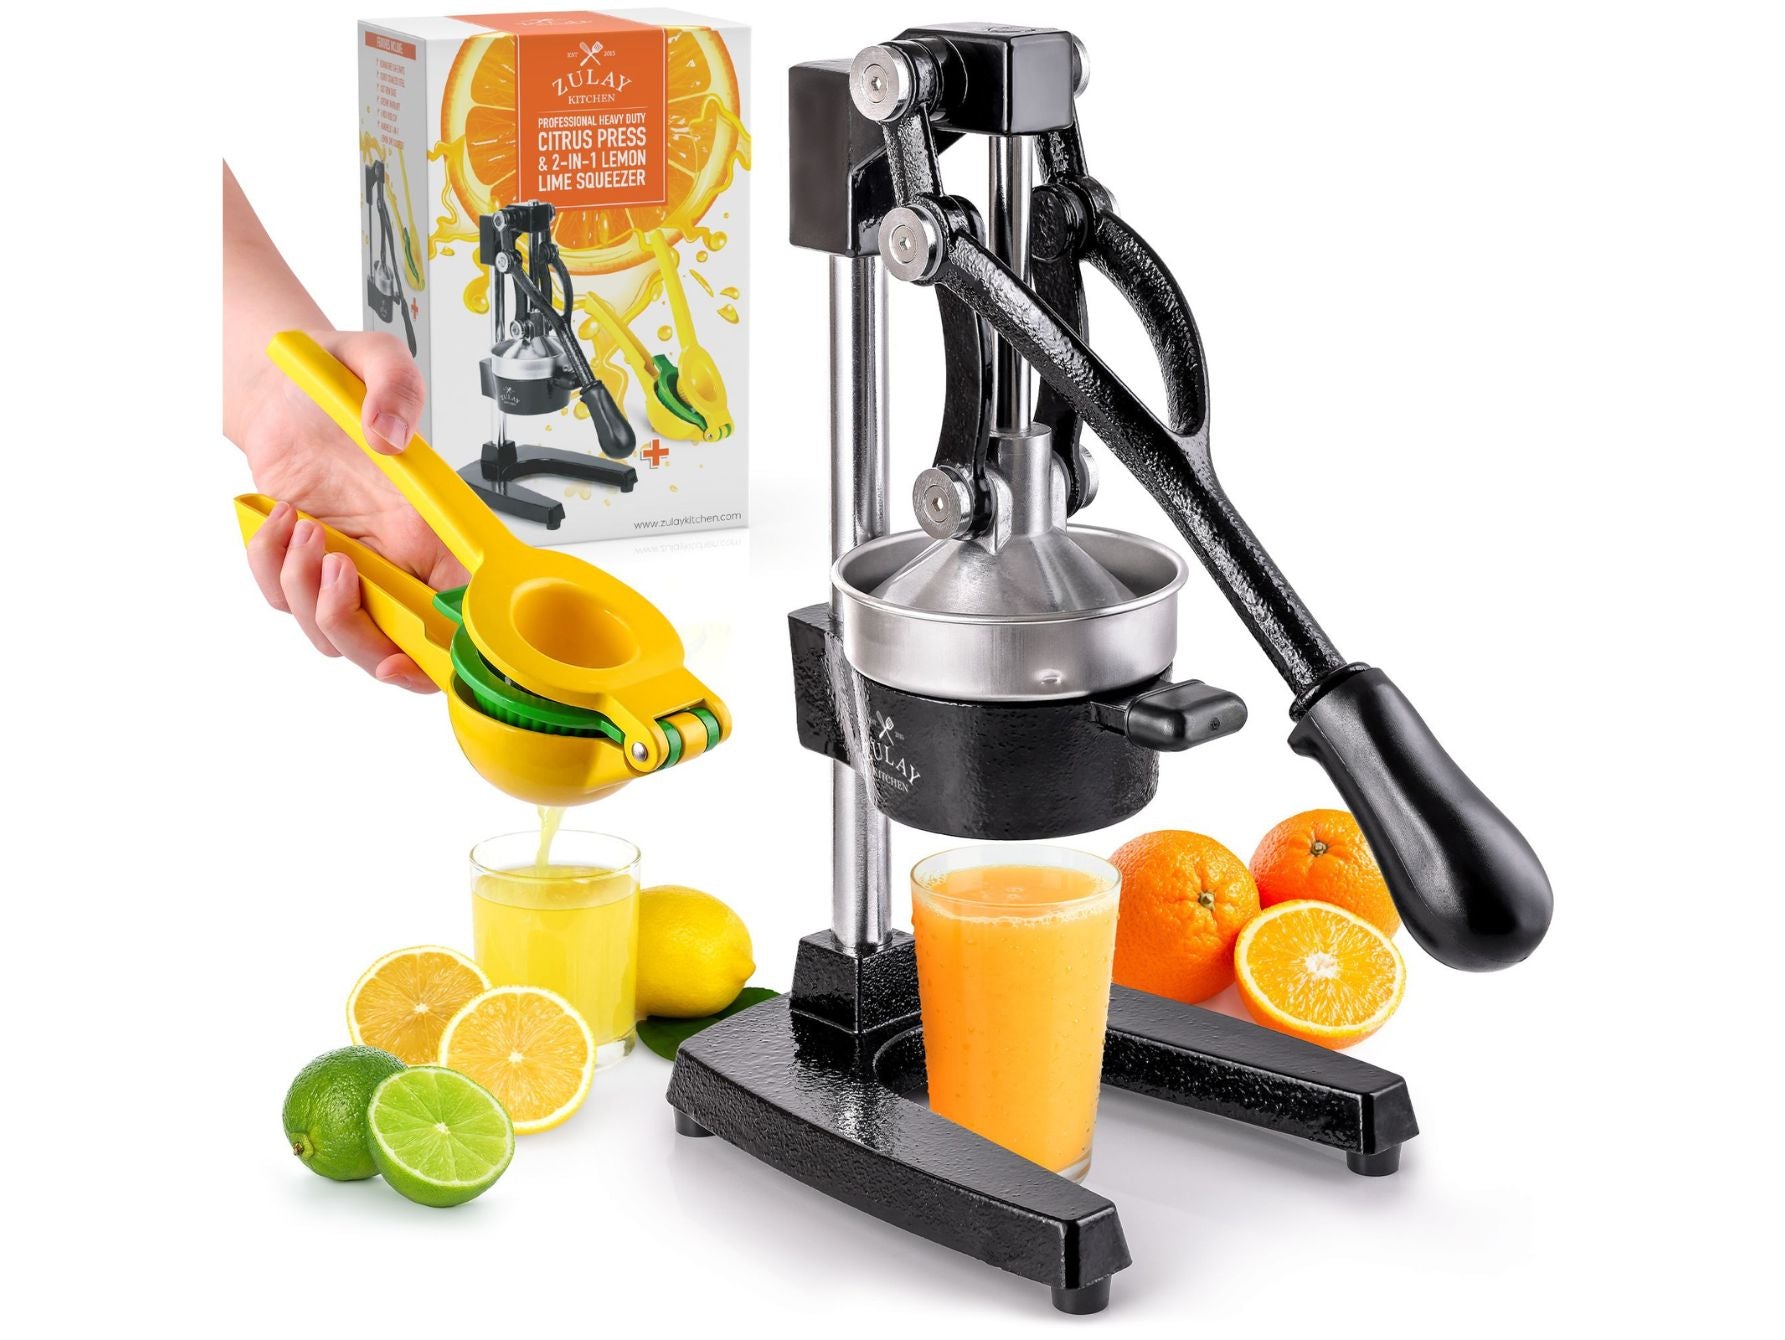 Professional Citrus Juicer + 2 in 1 Lemon Squeezer COMPLETE SET by Zulay Kitchen